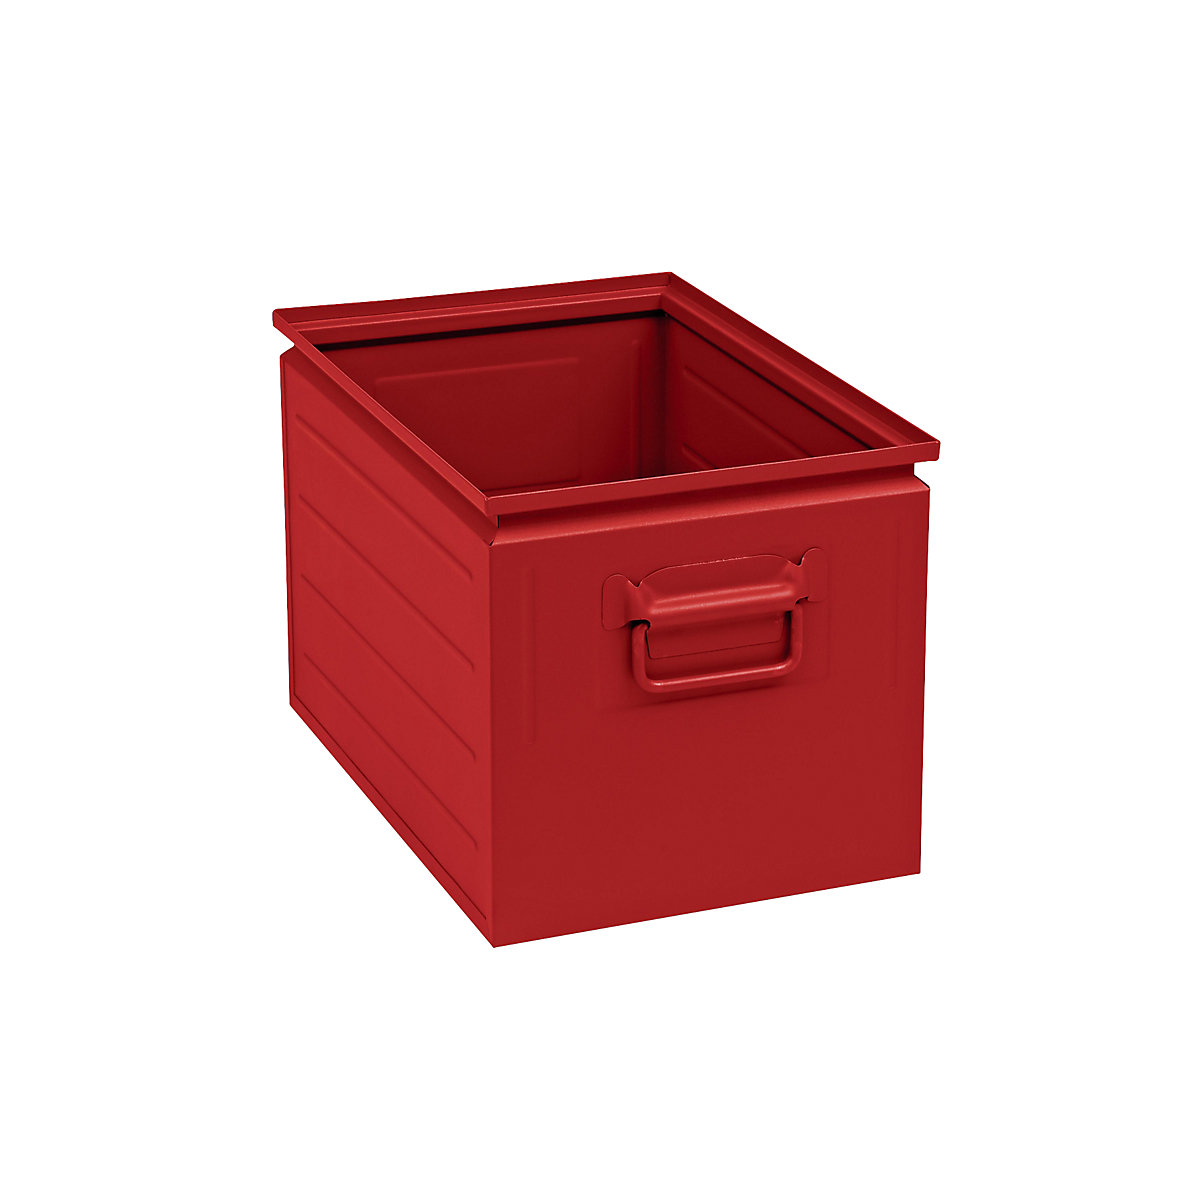 Stacking container made of sheet steel, capacity approx. 35 l, flame red RAL 3000